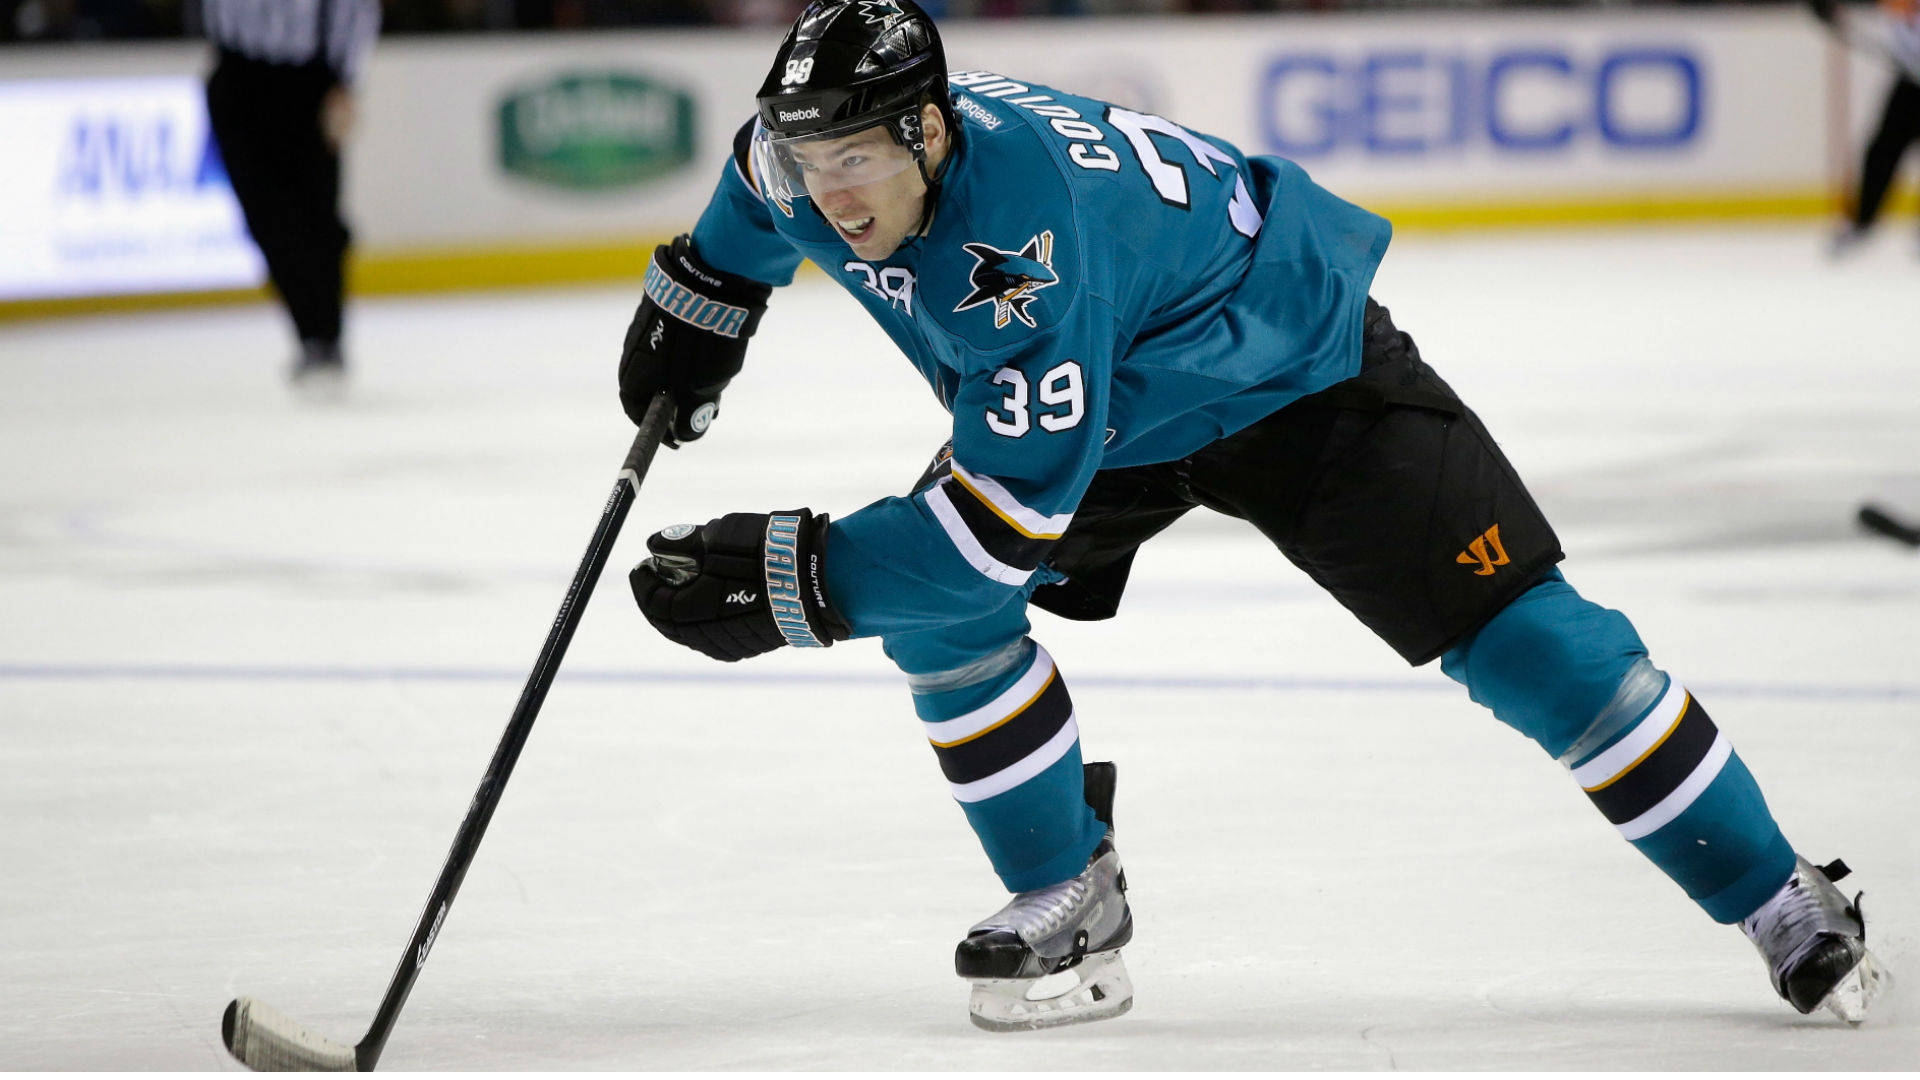 Canadian Professional Ice Hockey Center Logan Couture Playing On Rink